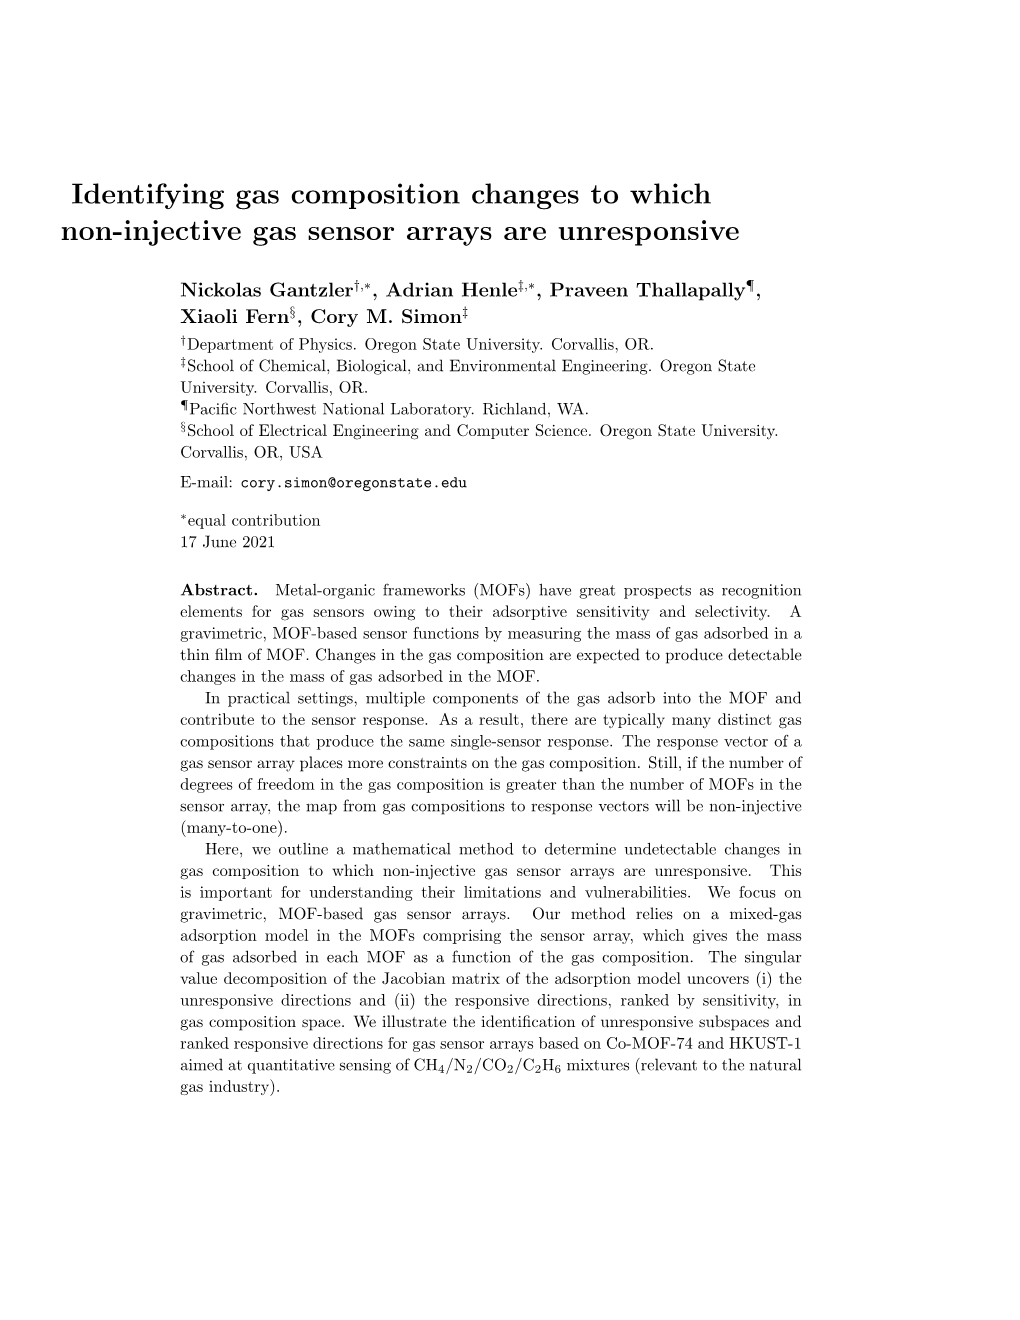 Identifying Gas Composition Changes to Which Non-Injective Gas Sensor Arrays Are Unresponsive